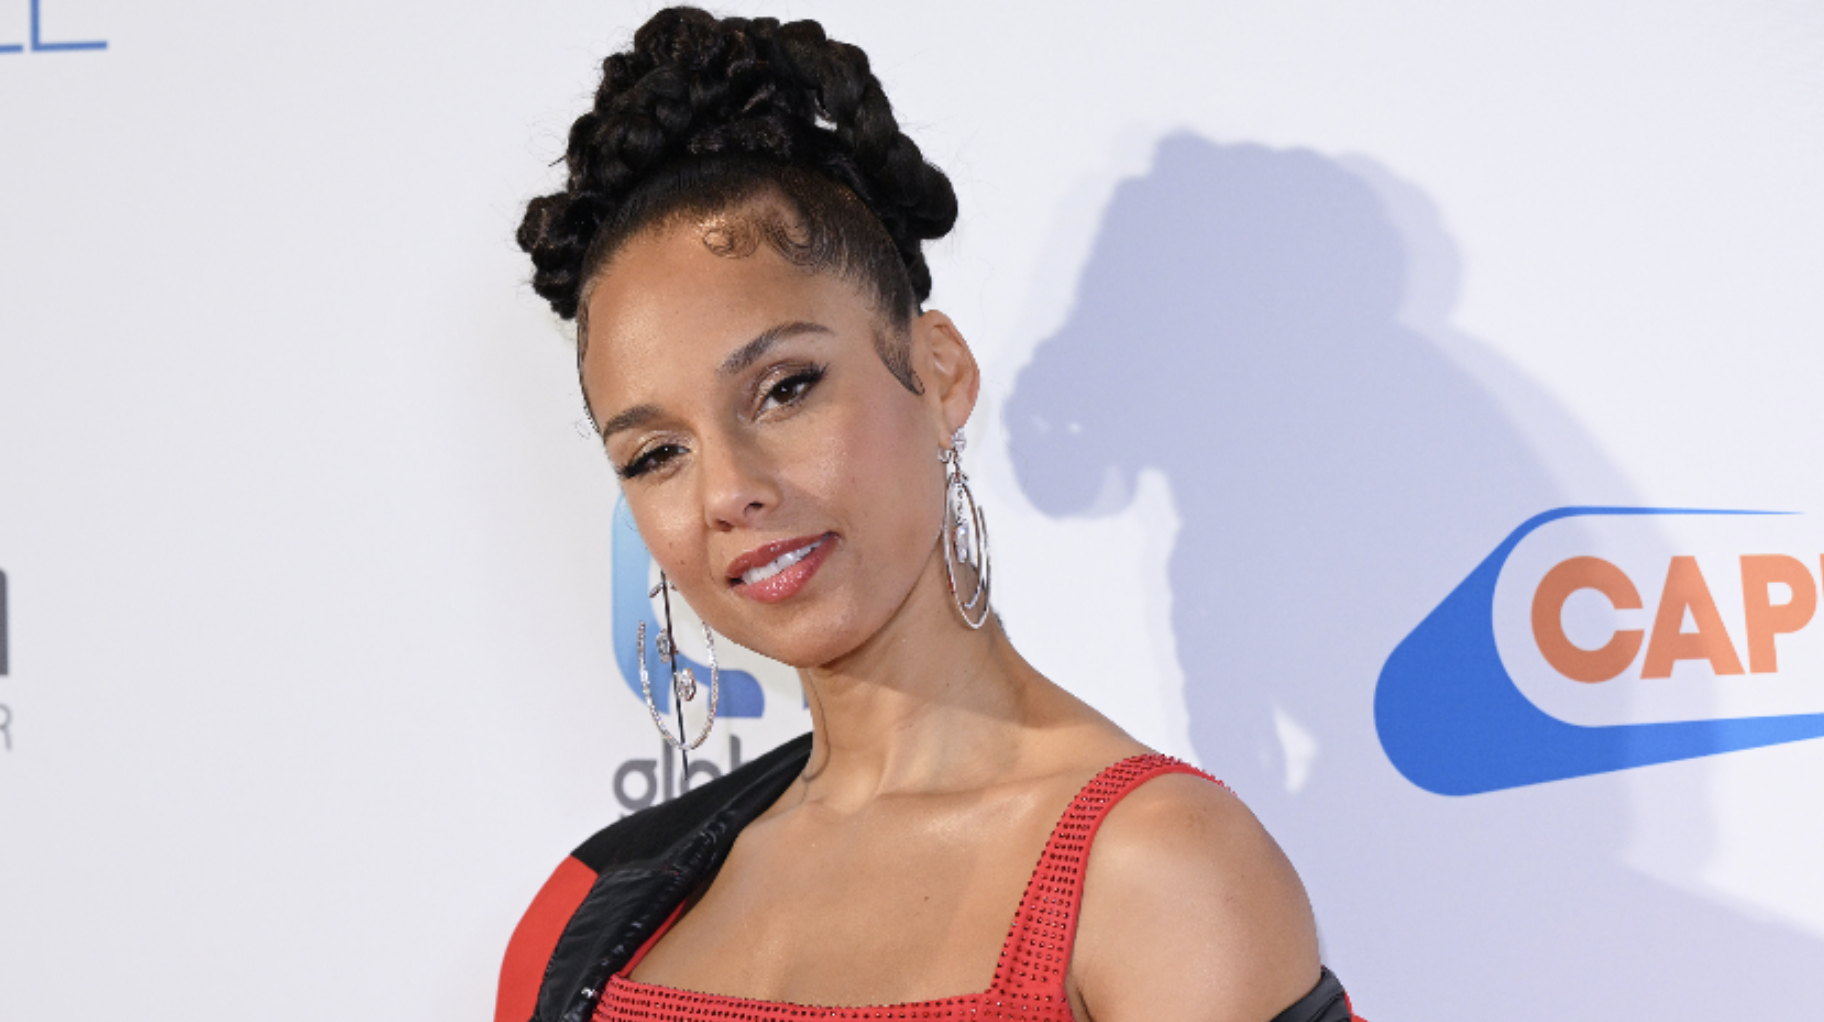 Alicia Keys Shares The Sweet Connection She Has With Beyoncé's Daughters Blue Ivy and Rumi